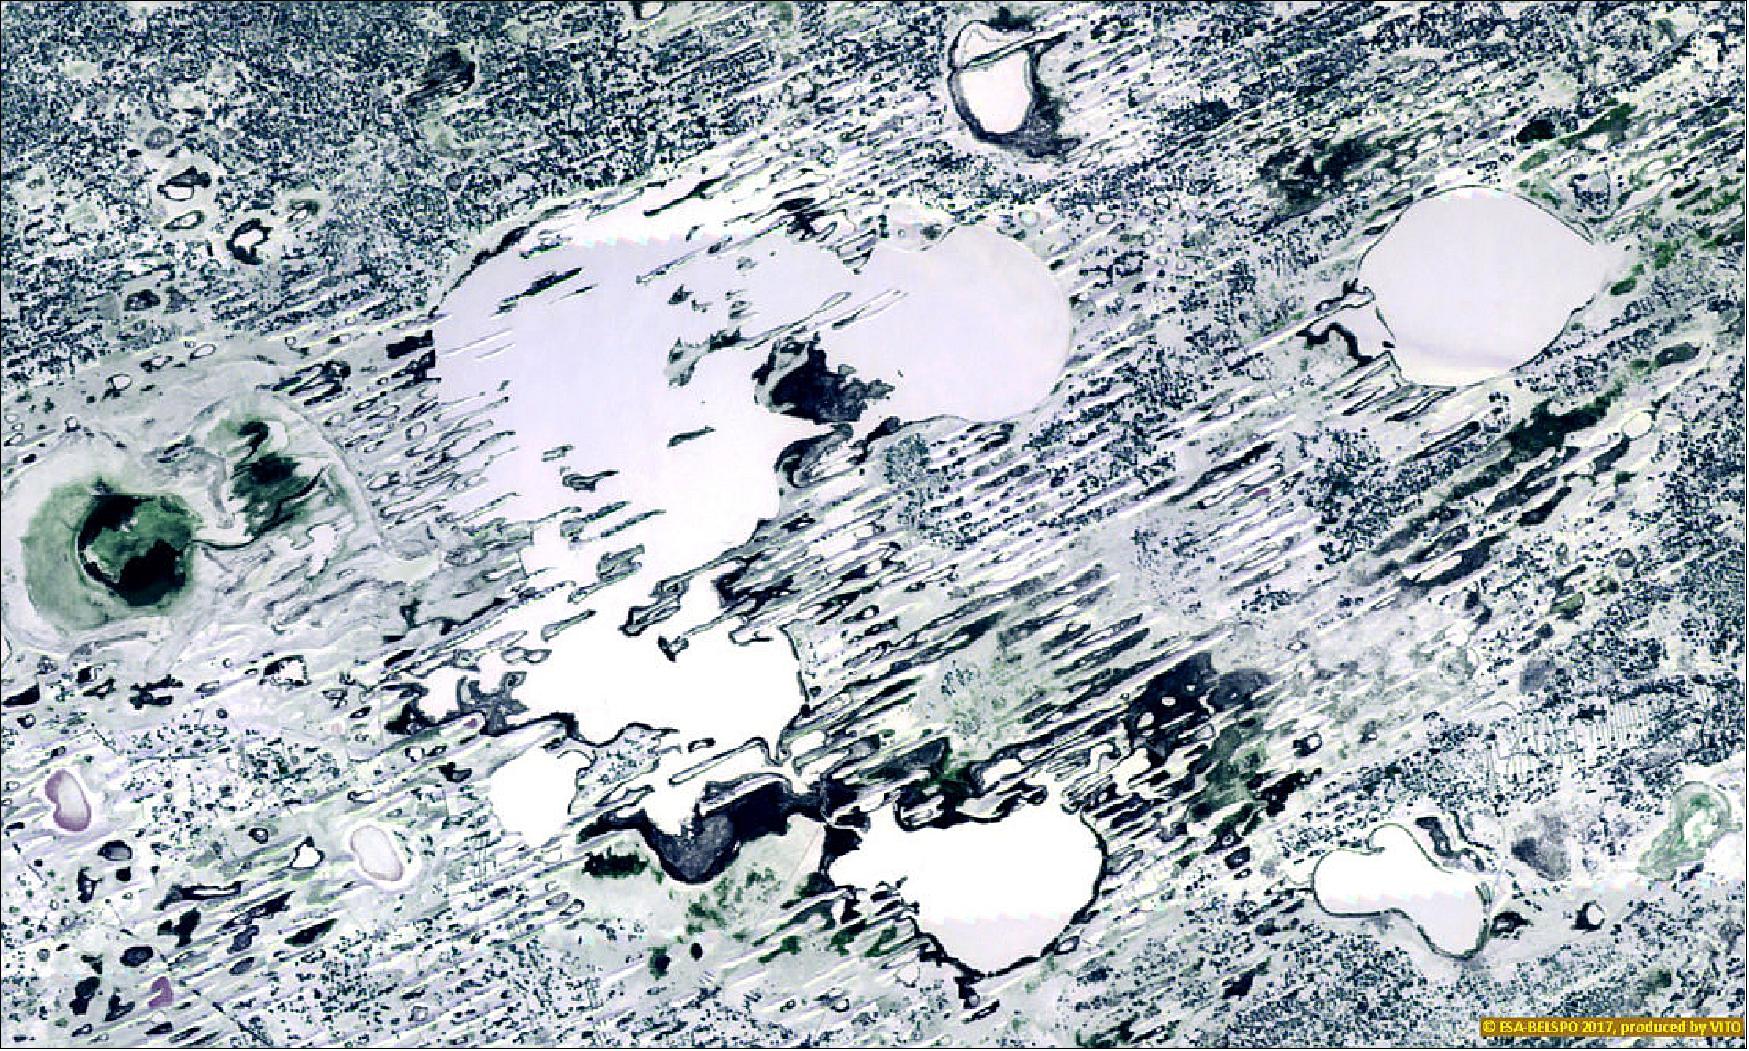 Figure 33: This 100 m resolution image was acquired by PROBA-V on 1 December 2016 (image credit: ESA/Belspo – produced by VITO)